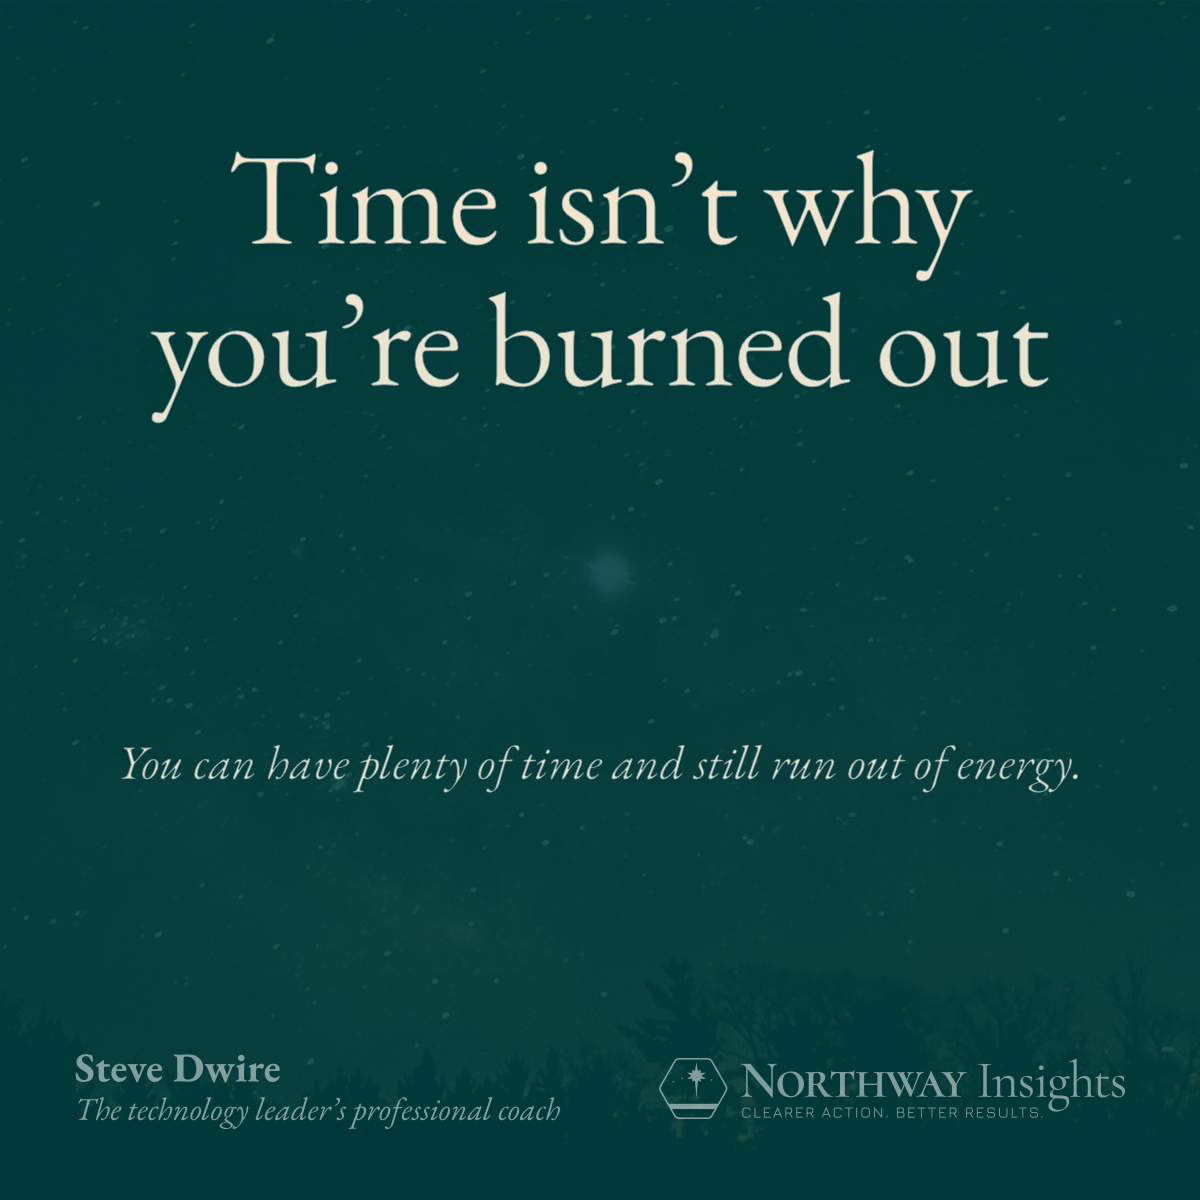 Time isn't why you're burned out. (You can have plenty of time and still run out of energy.)